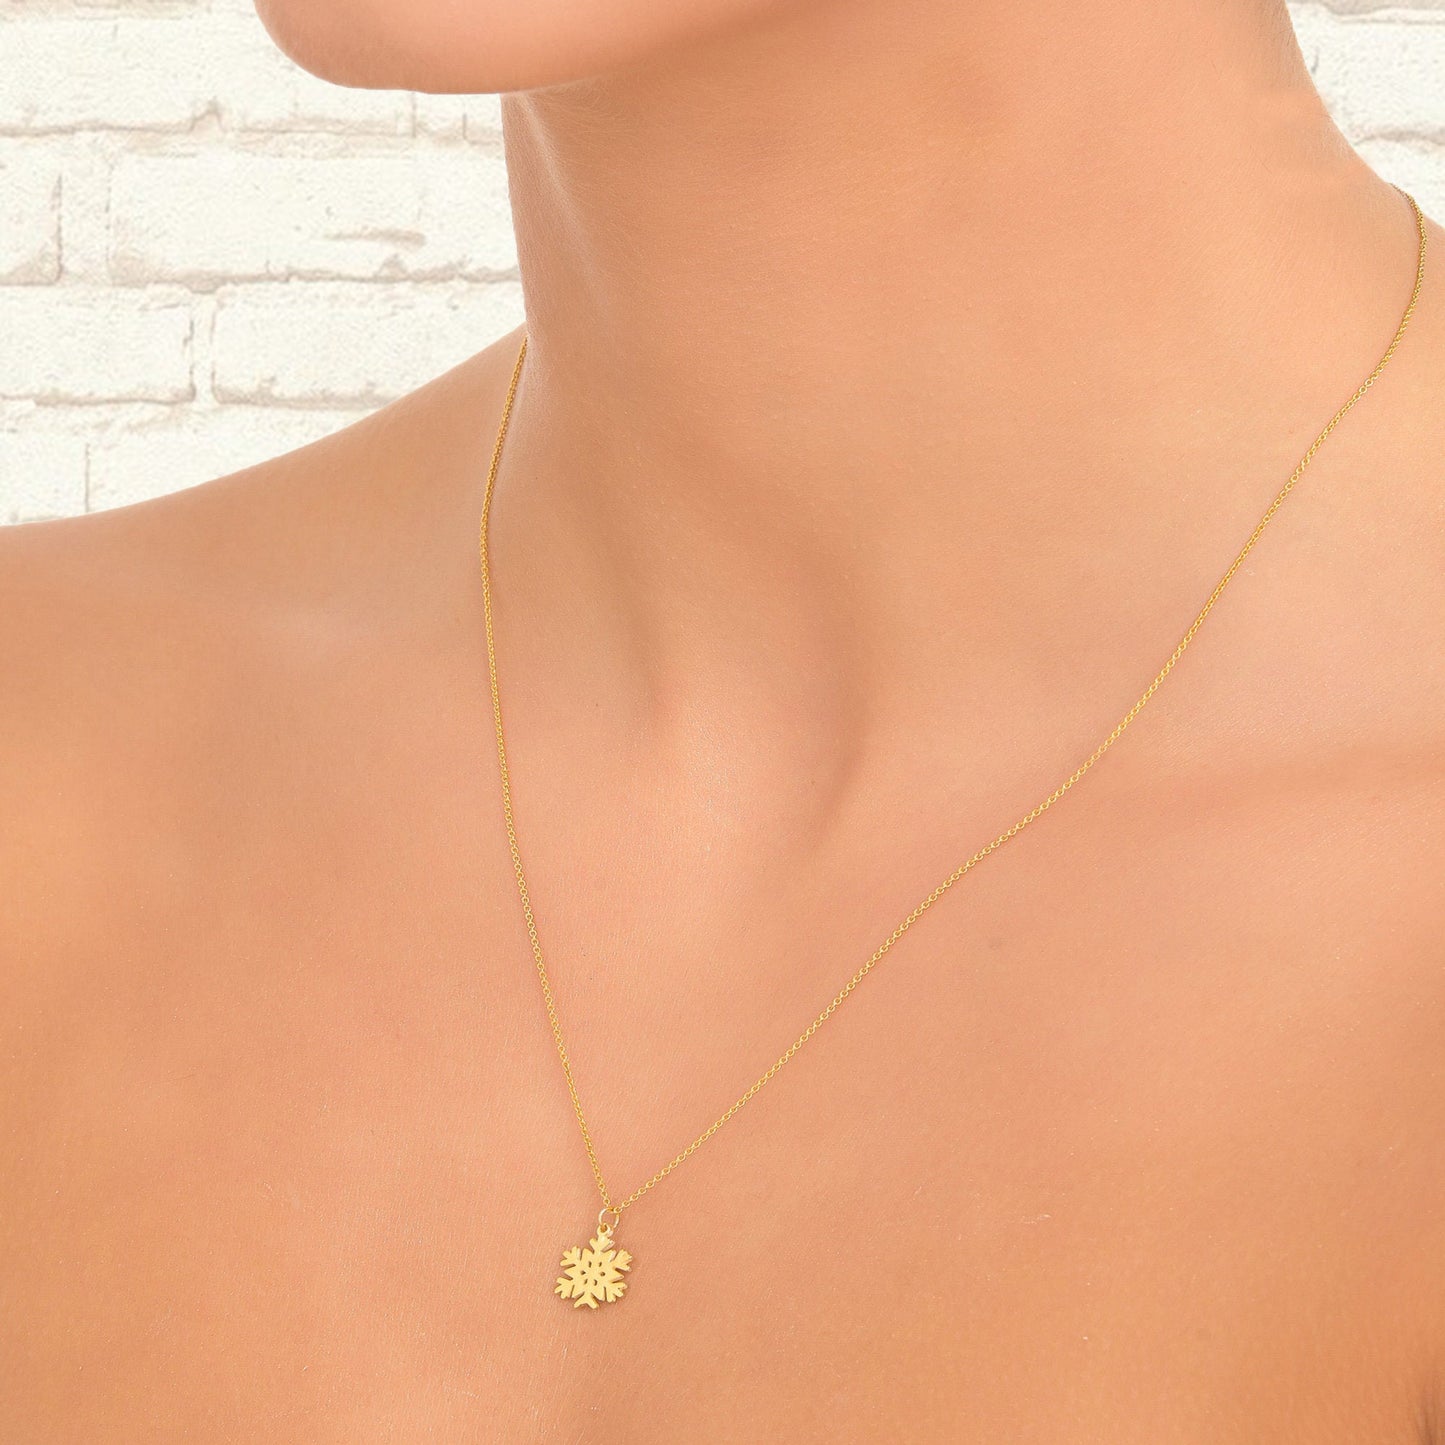 Snowflake Necklace, Dainty Snowflake Necklace, Solid Gold Snowflake Necklace, Winter Jewelry 14k gold necklace layered necklace gift for her